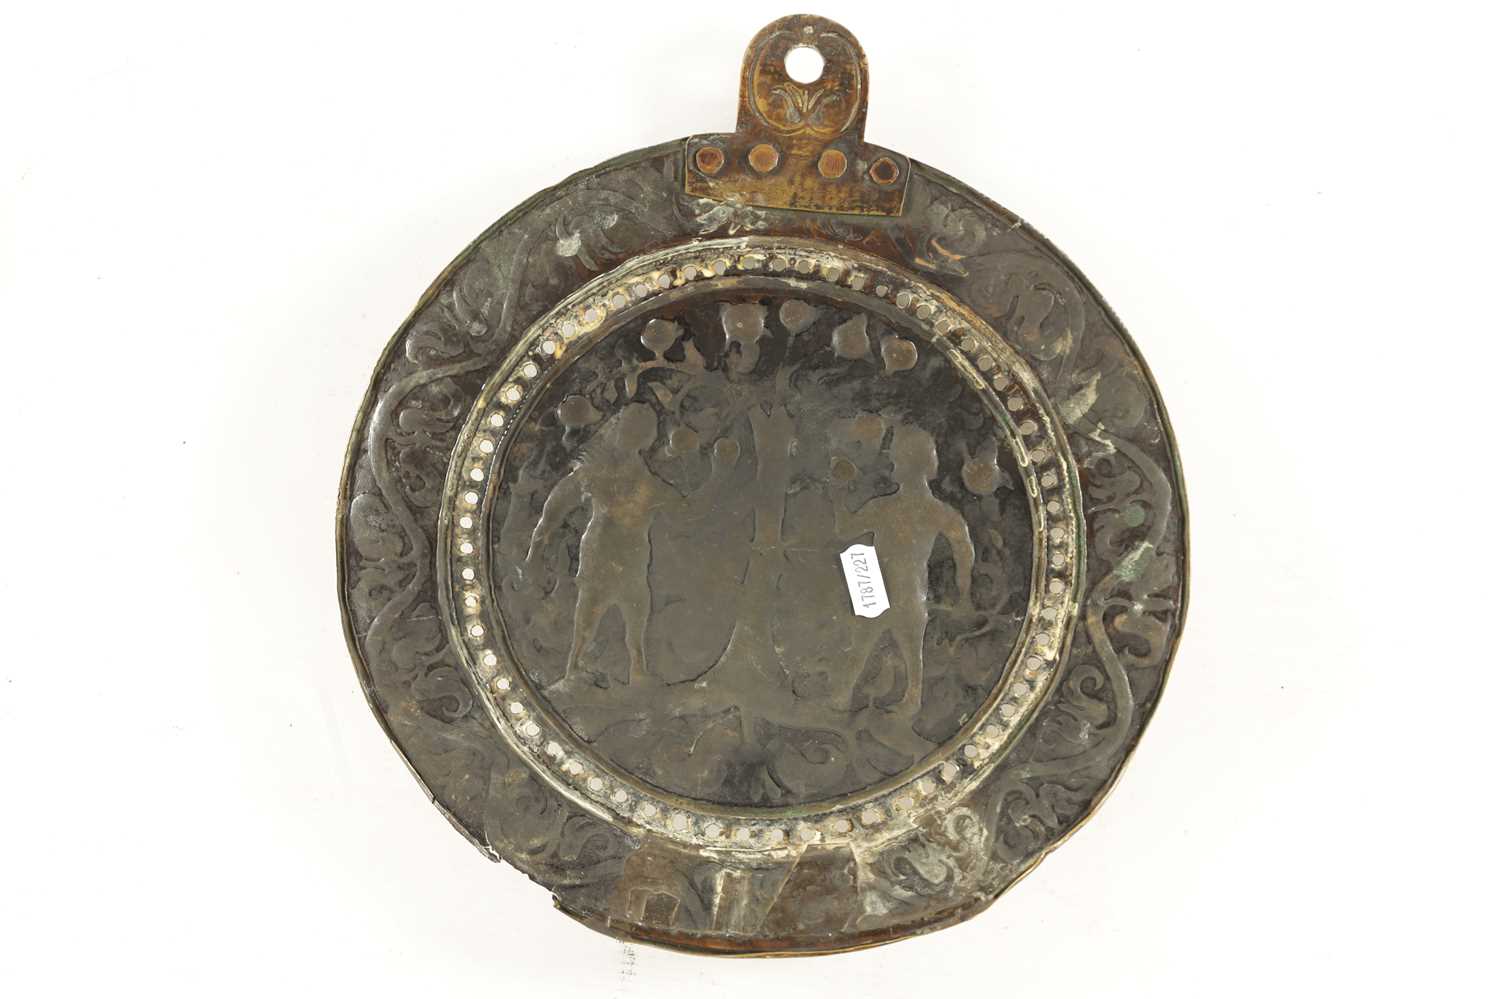 A LATE 17TH CENTURY ADAM & EVE EMBOSSED HANGING WALL LIGHT PLAQUE - Image 7 of 7